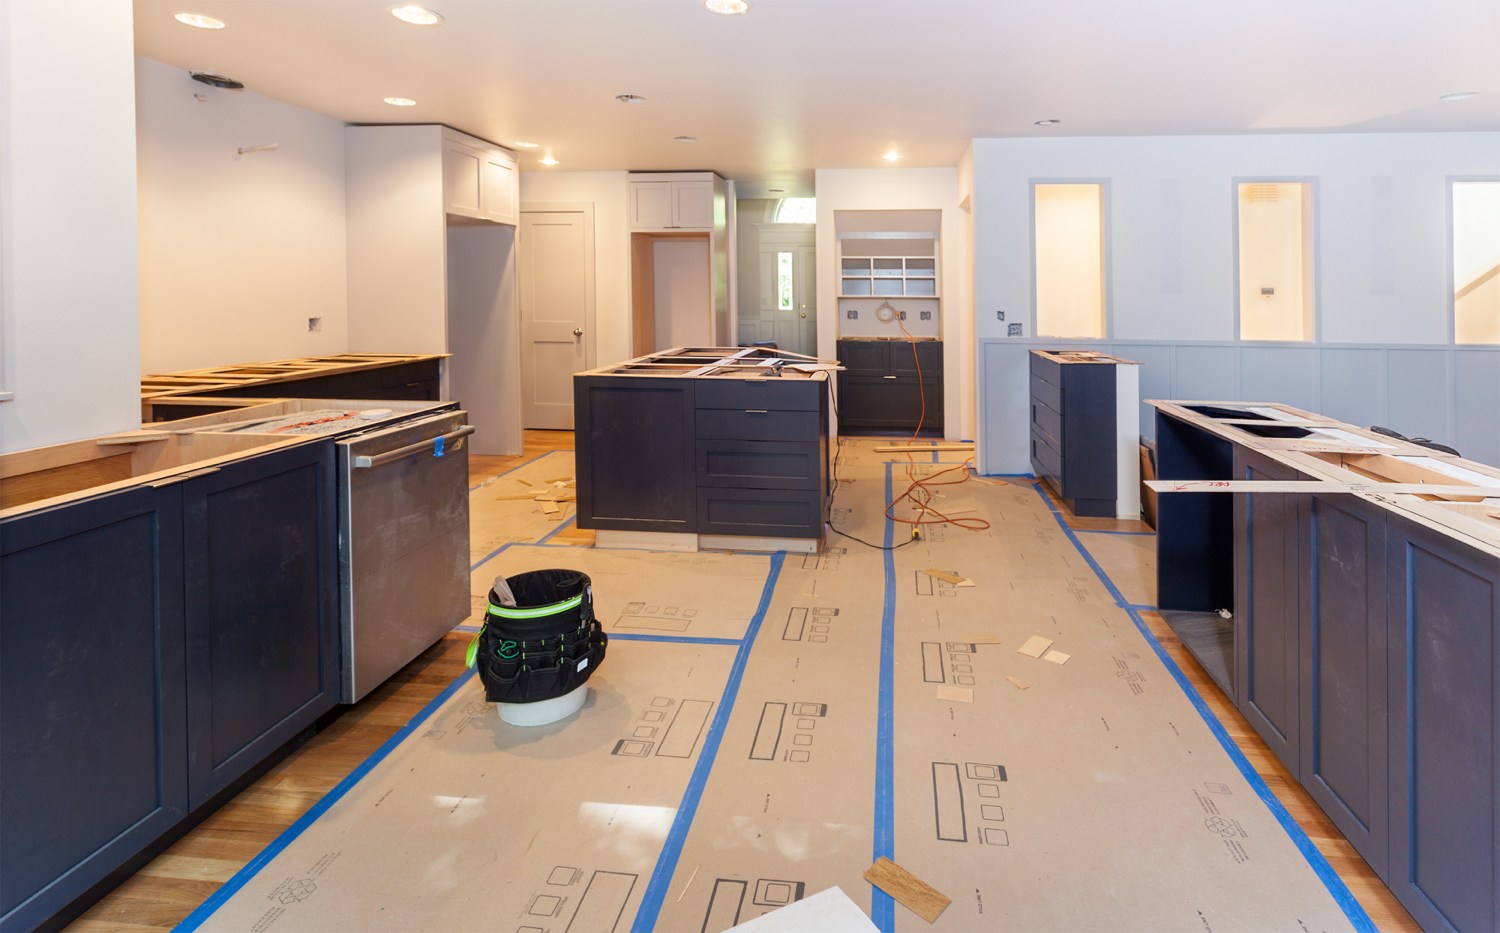 List Of Mistakes You Should Avoid In Home Renovation